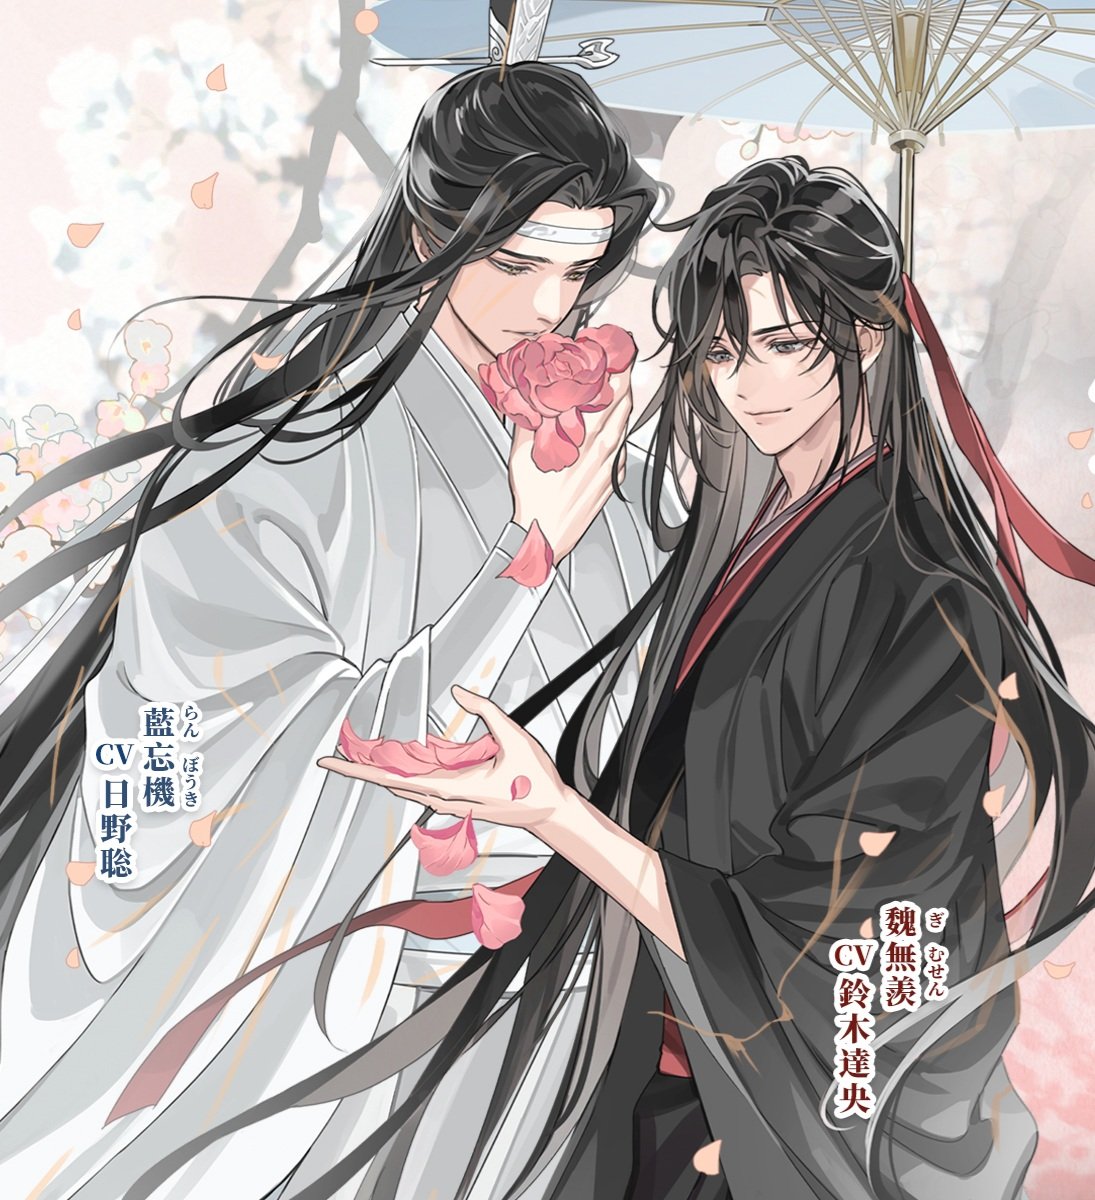 NEW WANGXIAN OFFICIAL ILLUSTRATION!!!! 🌸🩷🌸
from mdzs jp audio drama 
illustration by: GEAROUS